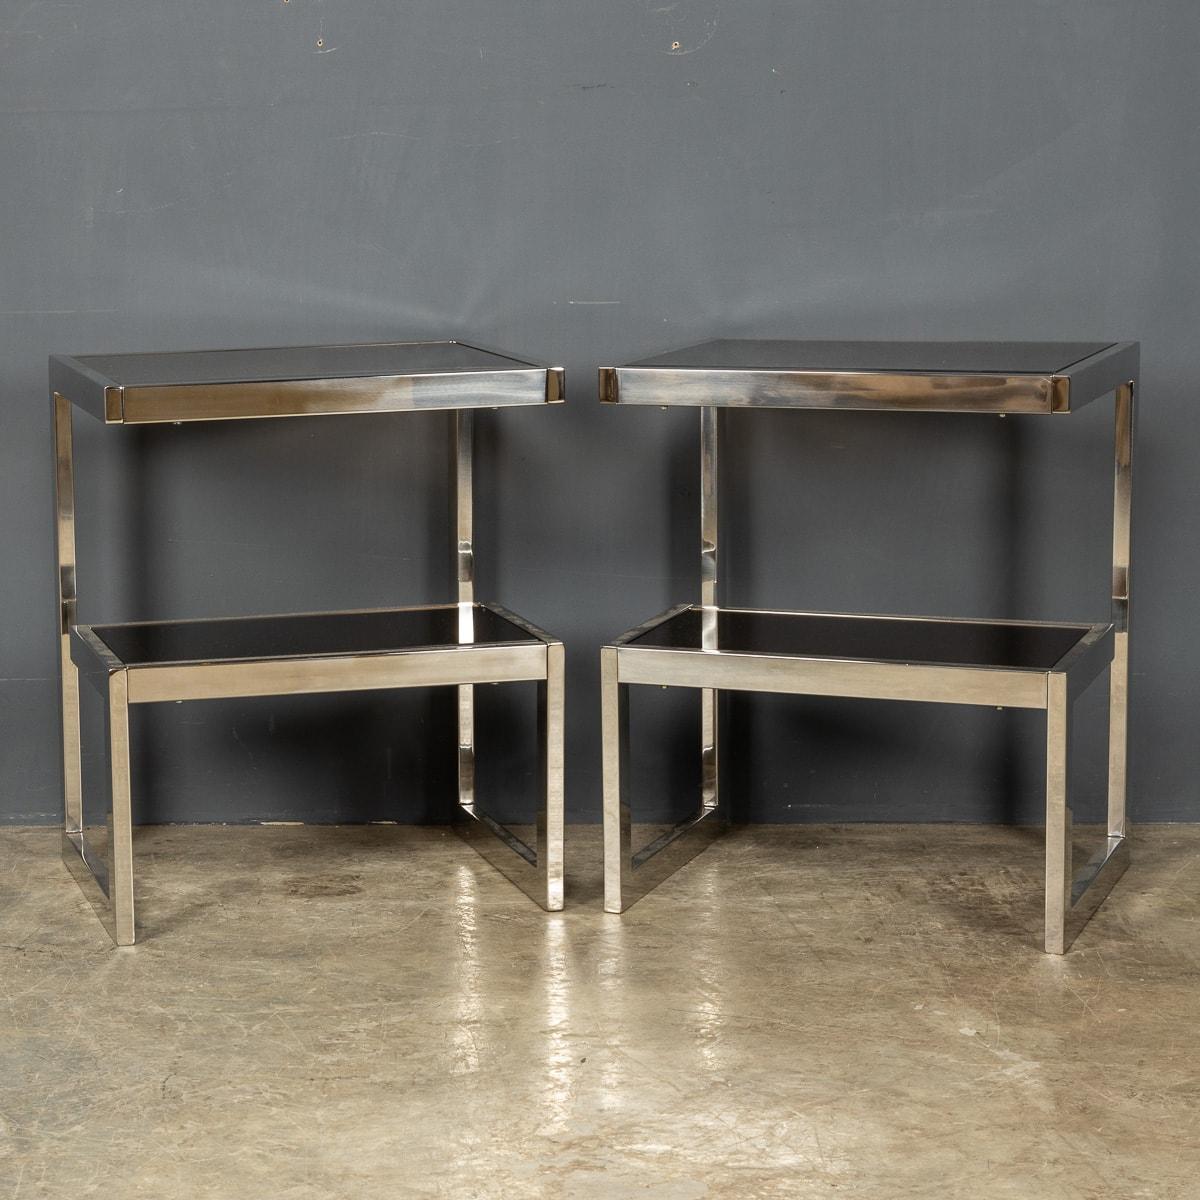 A pair of polished chrome G shaped end tables by Belgo Chrome with smoked glass top and mirrored shelf, c. 1970s. A wonderful addition to any interior, that will undoubtedly add style and sophistication.

Condition
In Good Condition - wear